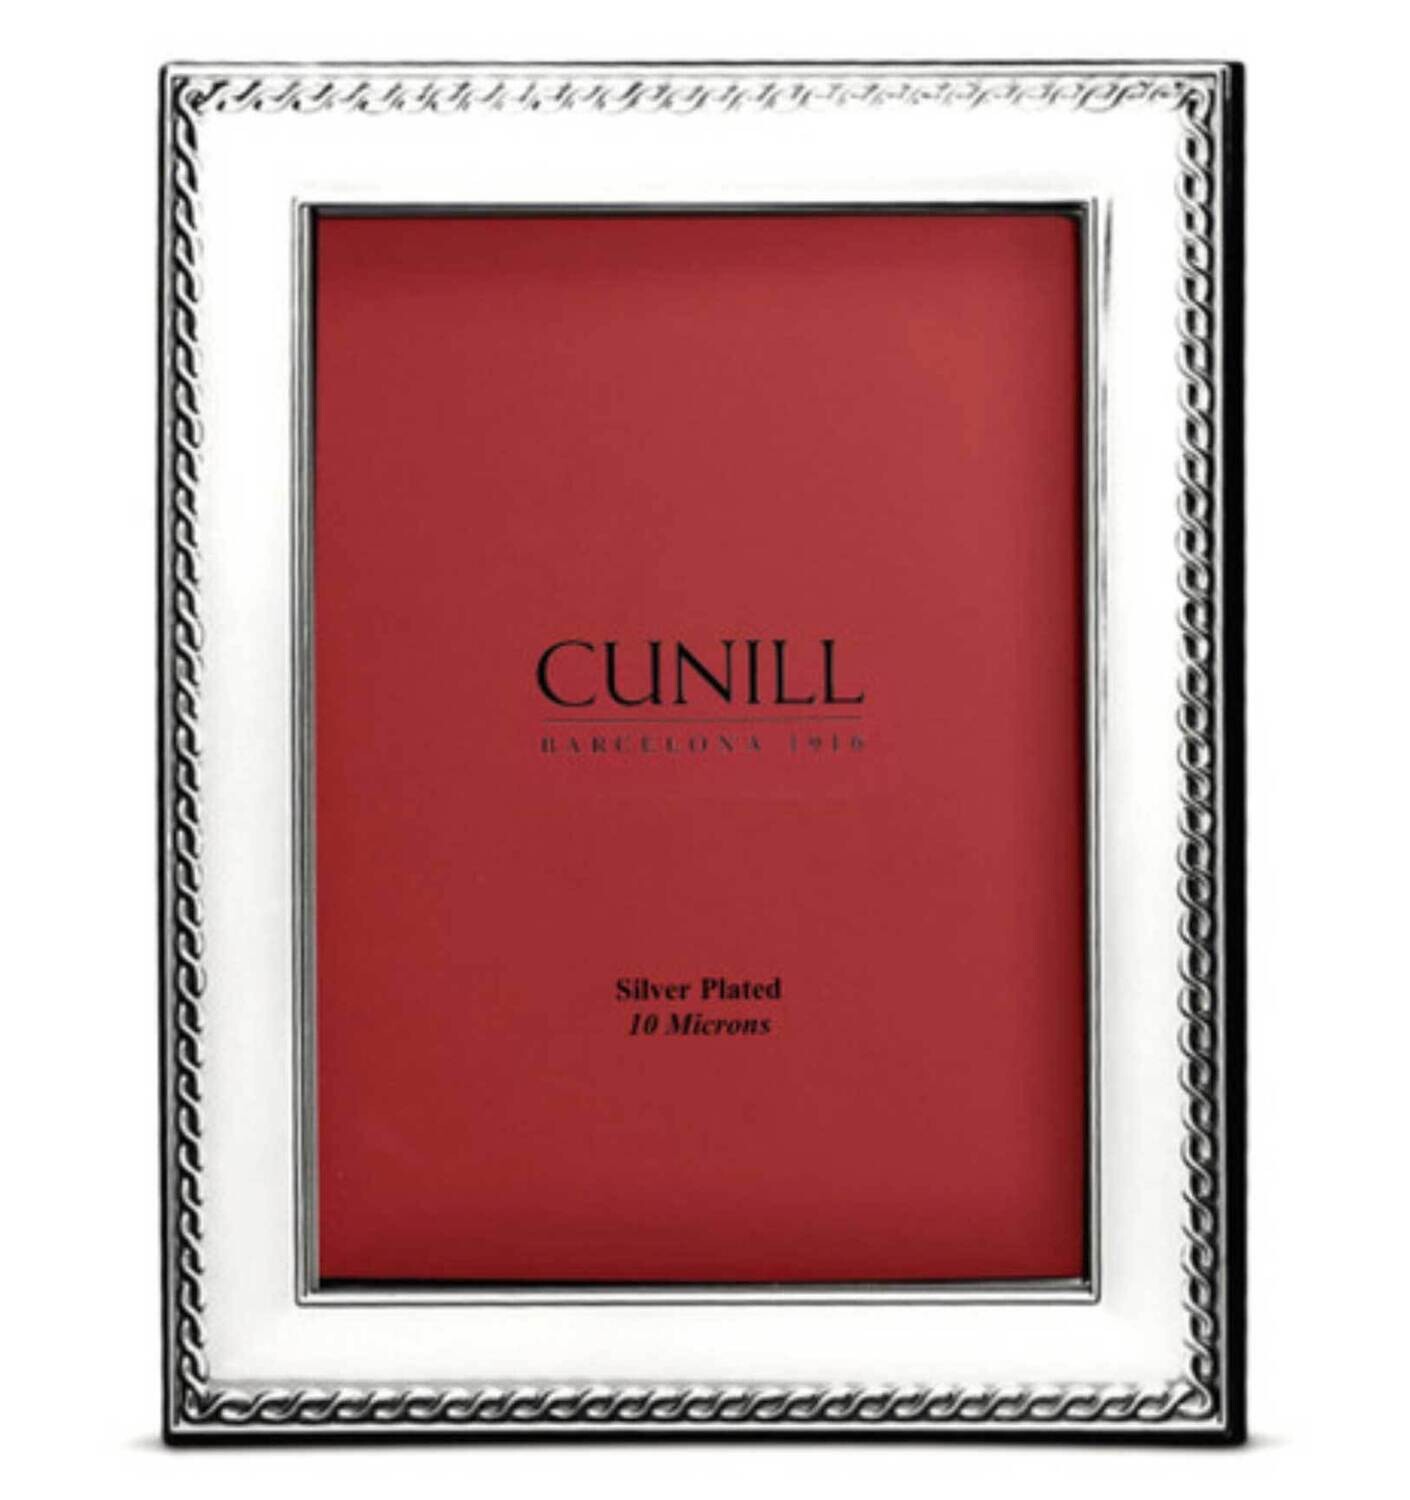 Cunill Links 5x7 Inch Picture Frame Silverplated 53657